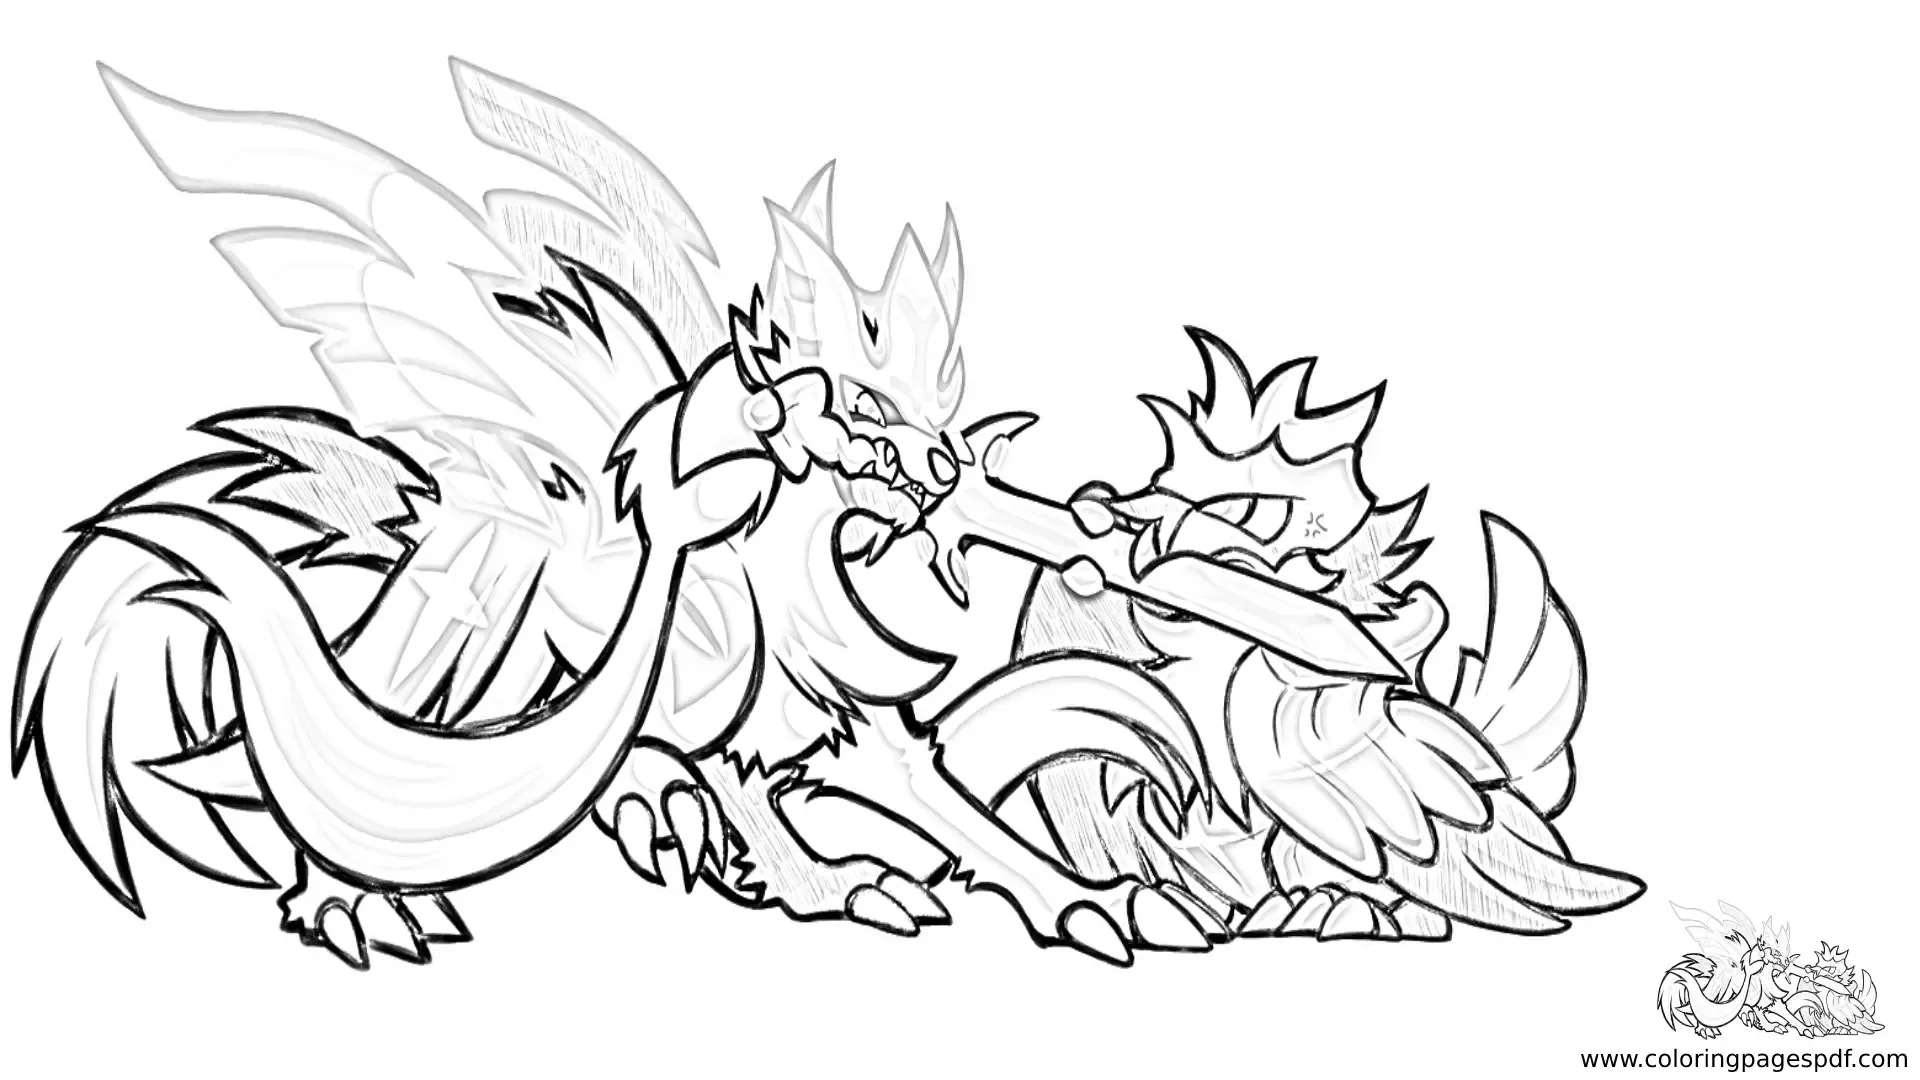 Coloring Page Of Zacian Fighting A Monster